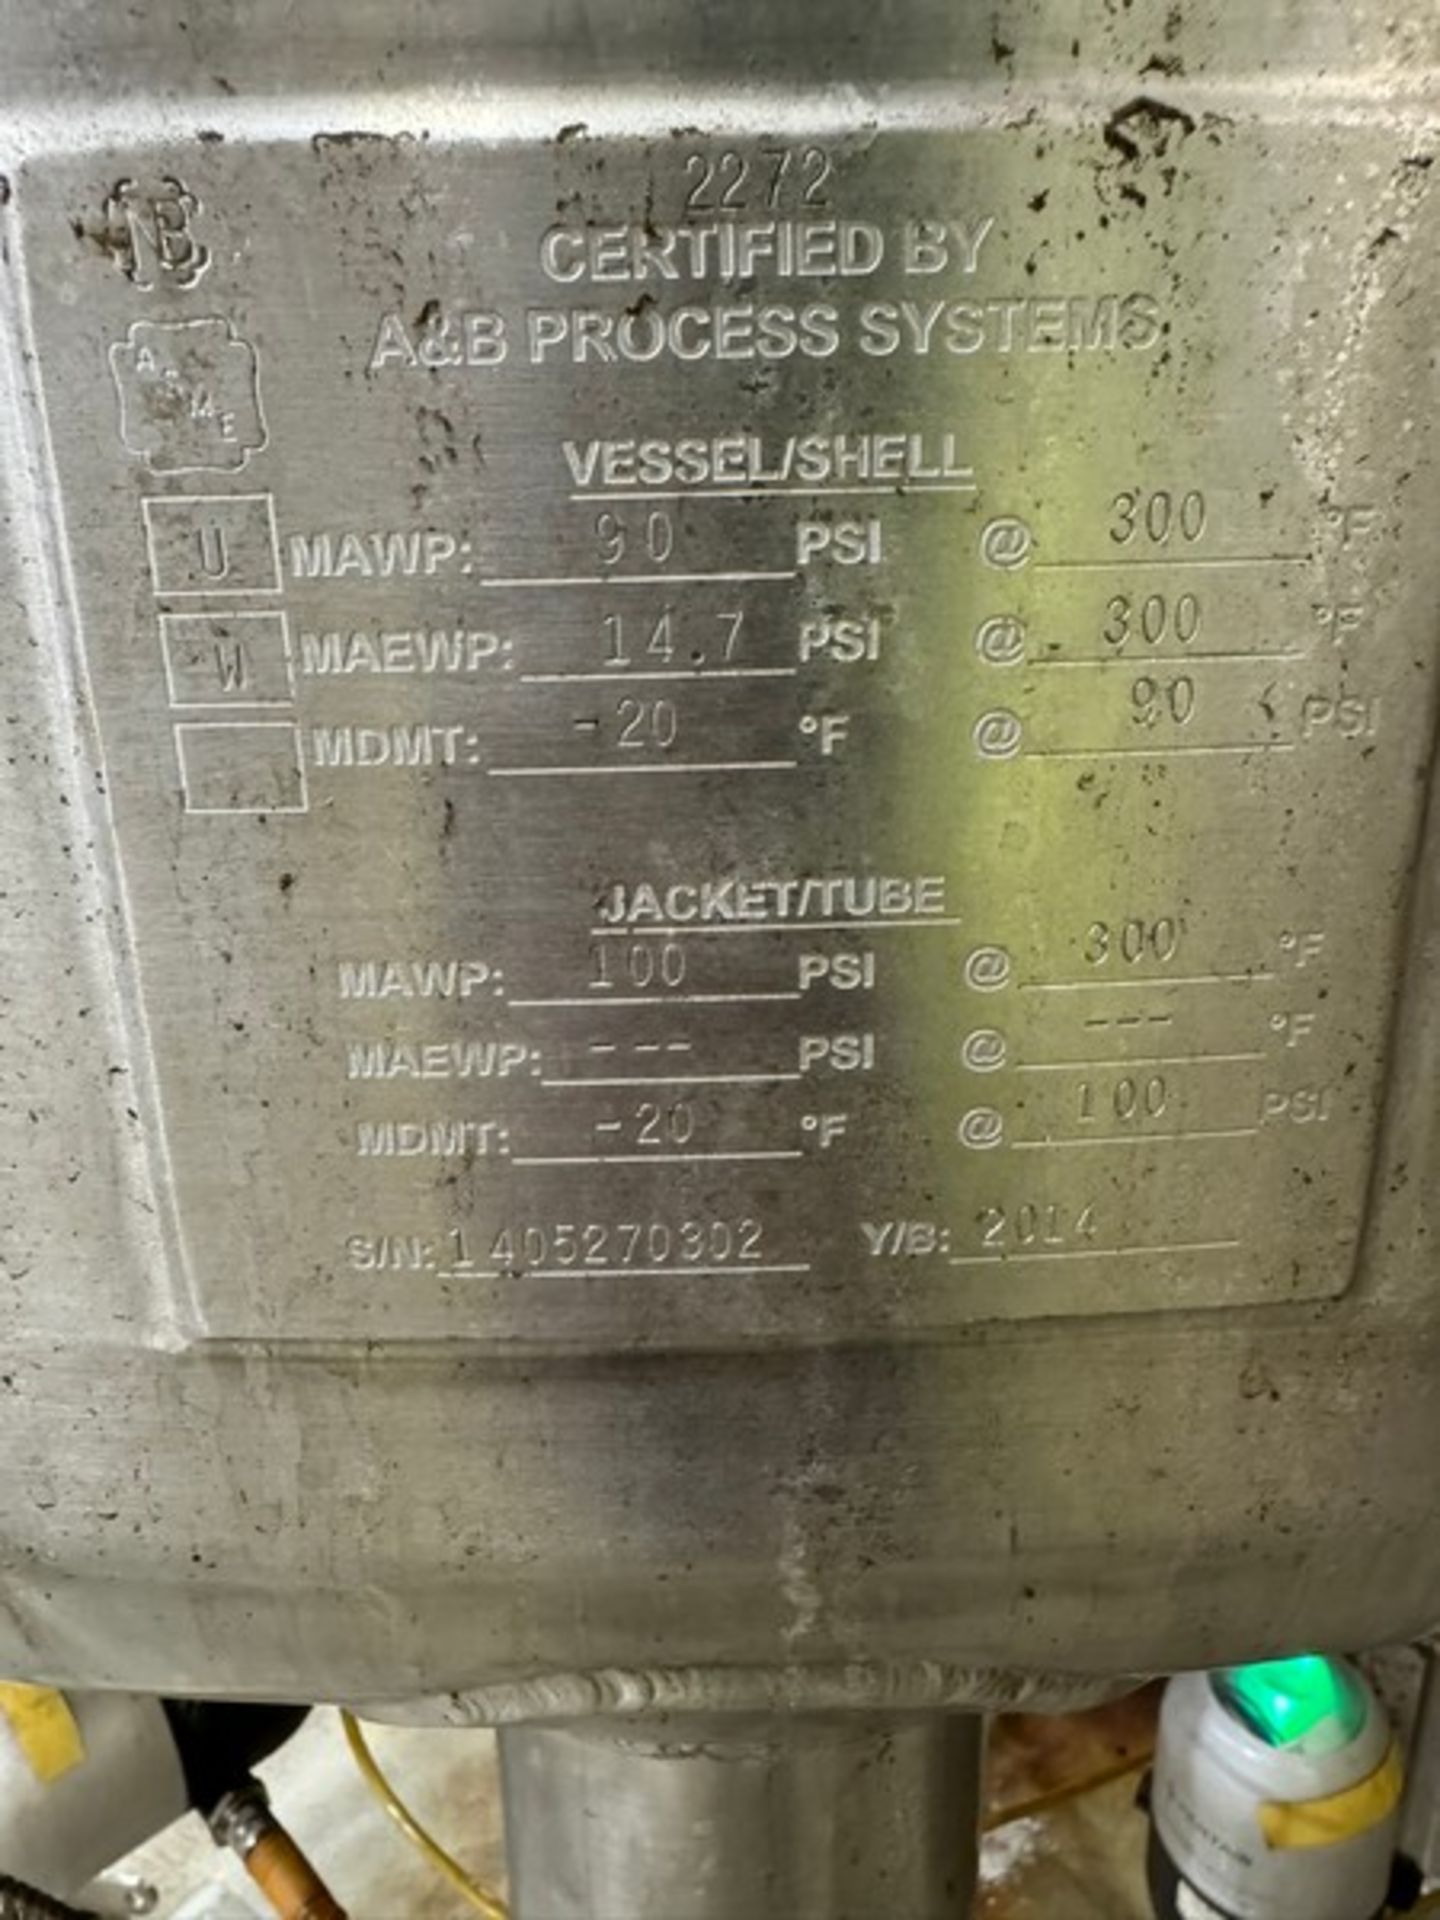 2014 A&B Process Systems Aprox. 300 Gal. S/S Tank, S/N 1405270302, Vessel Dims.: Aprox. 44” Dia. x - Image 6 of 7